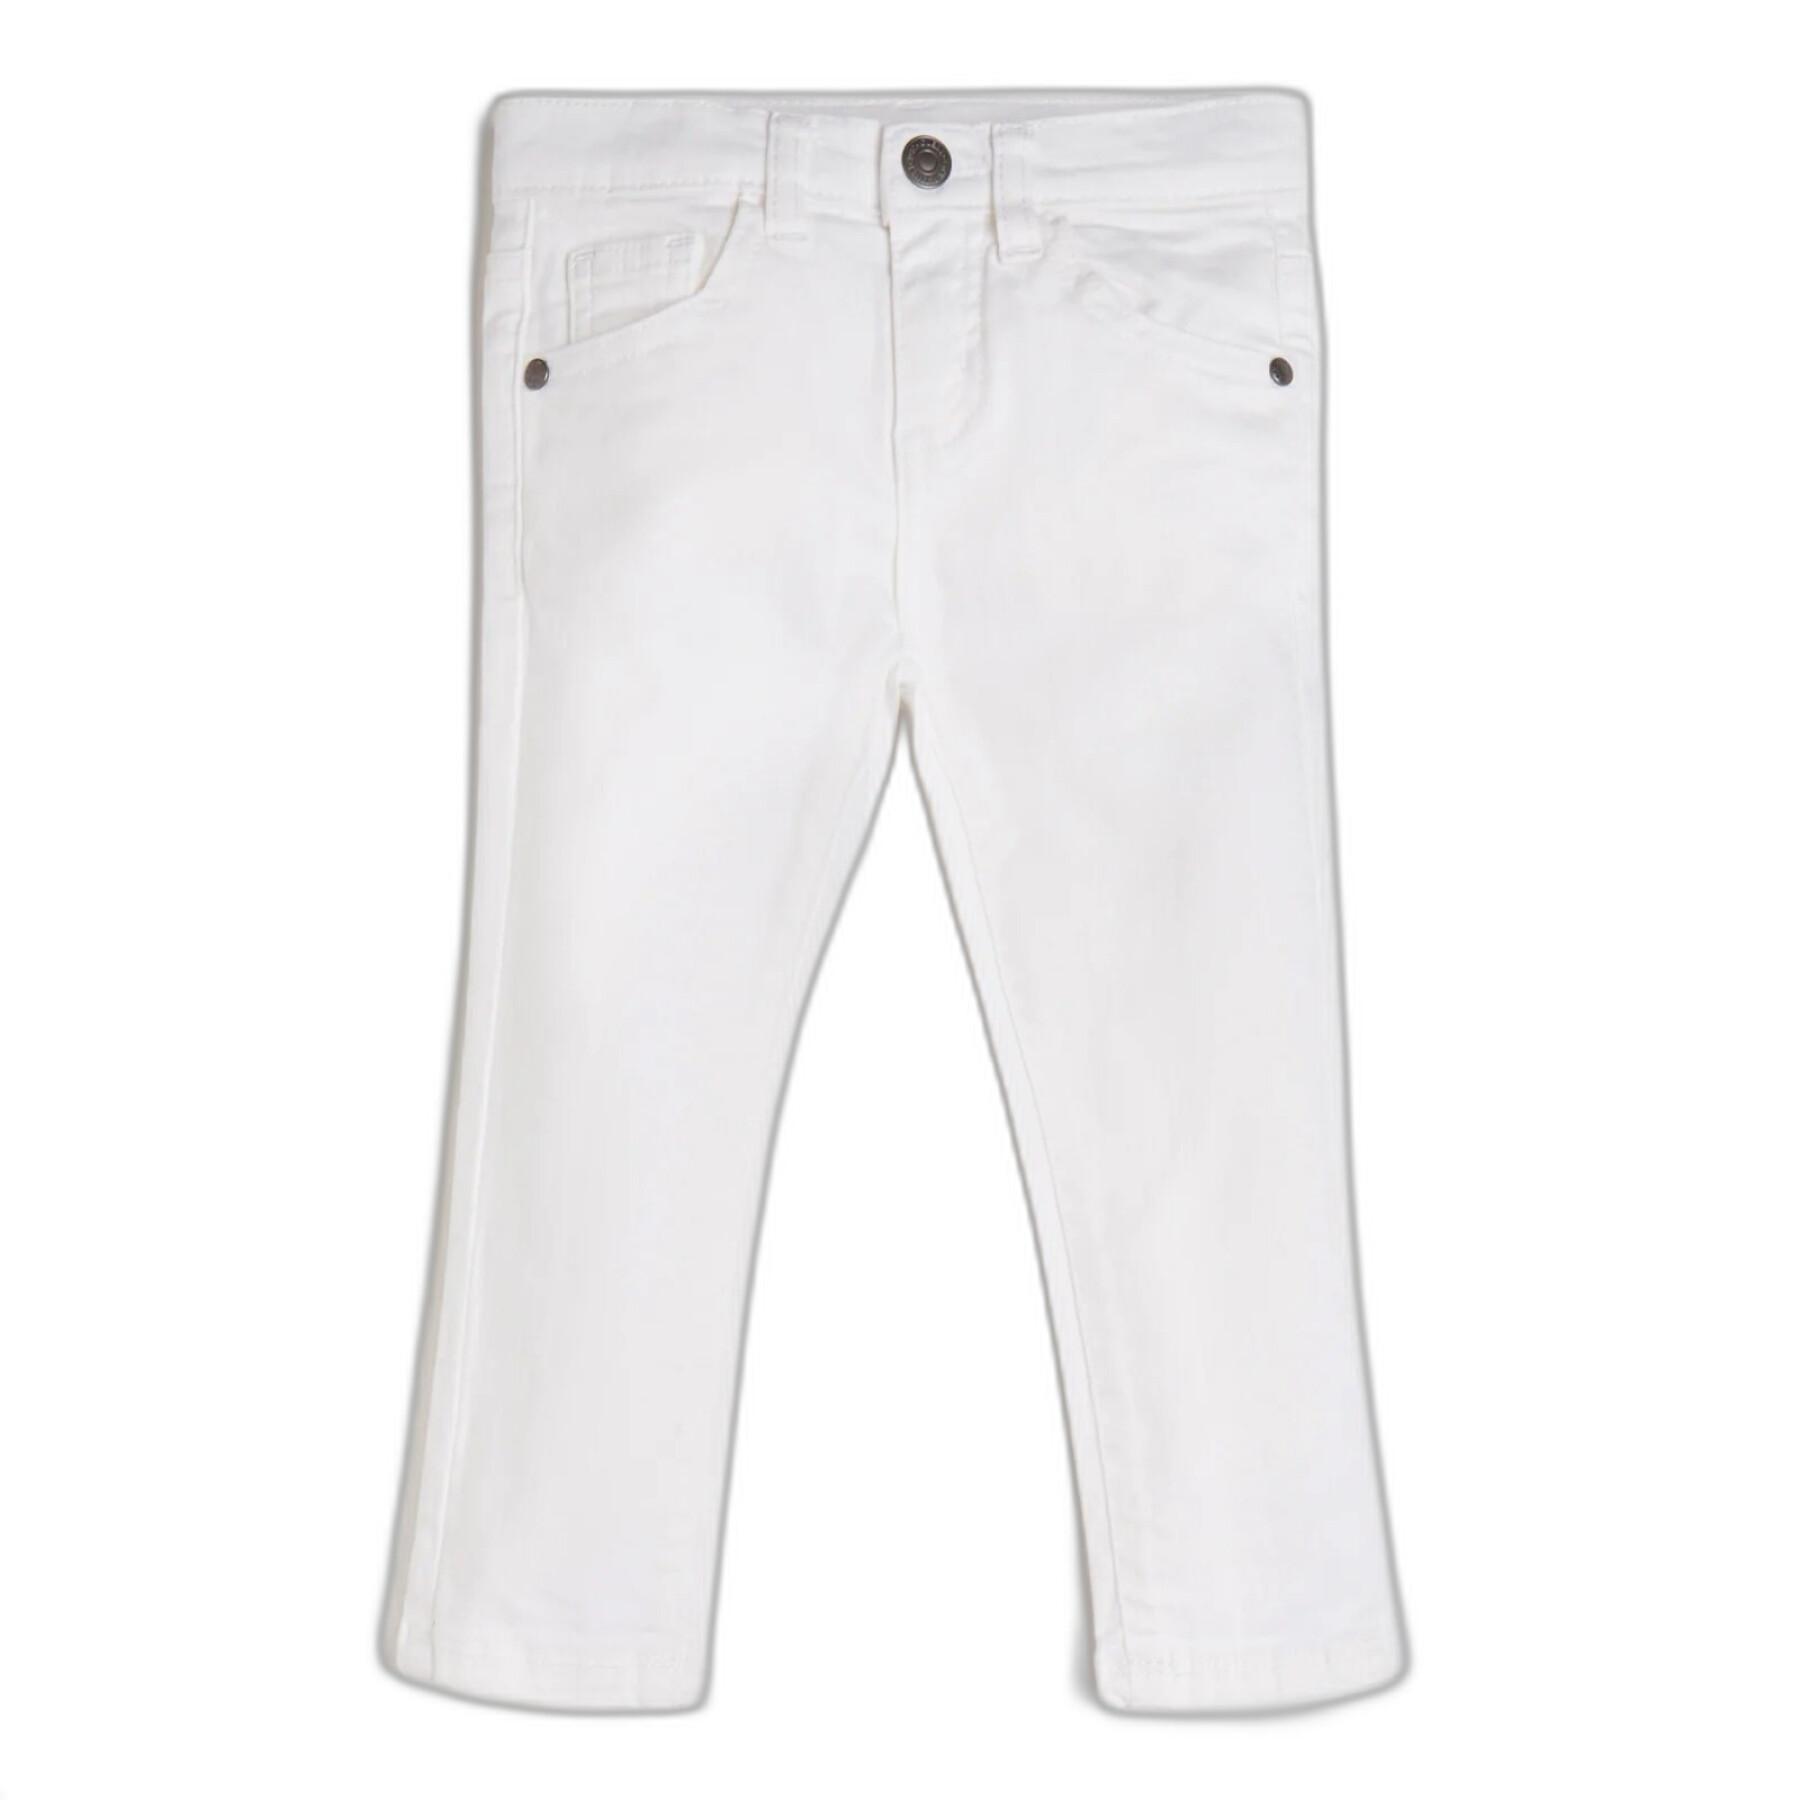 Kinder skinny jeans Guess St Bull Core